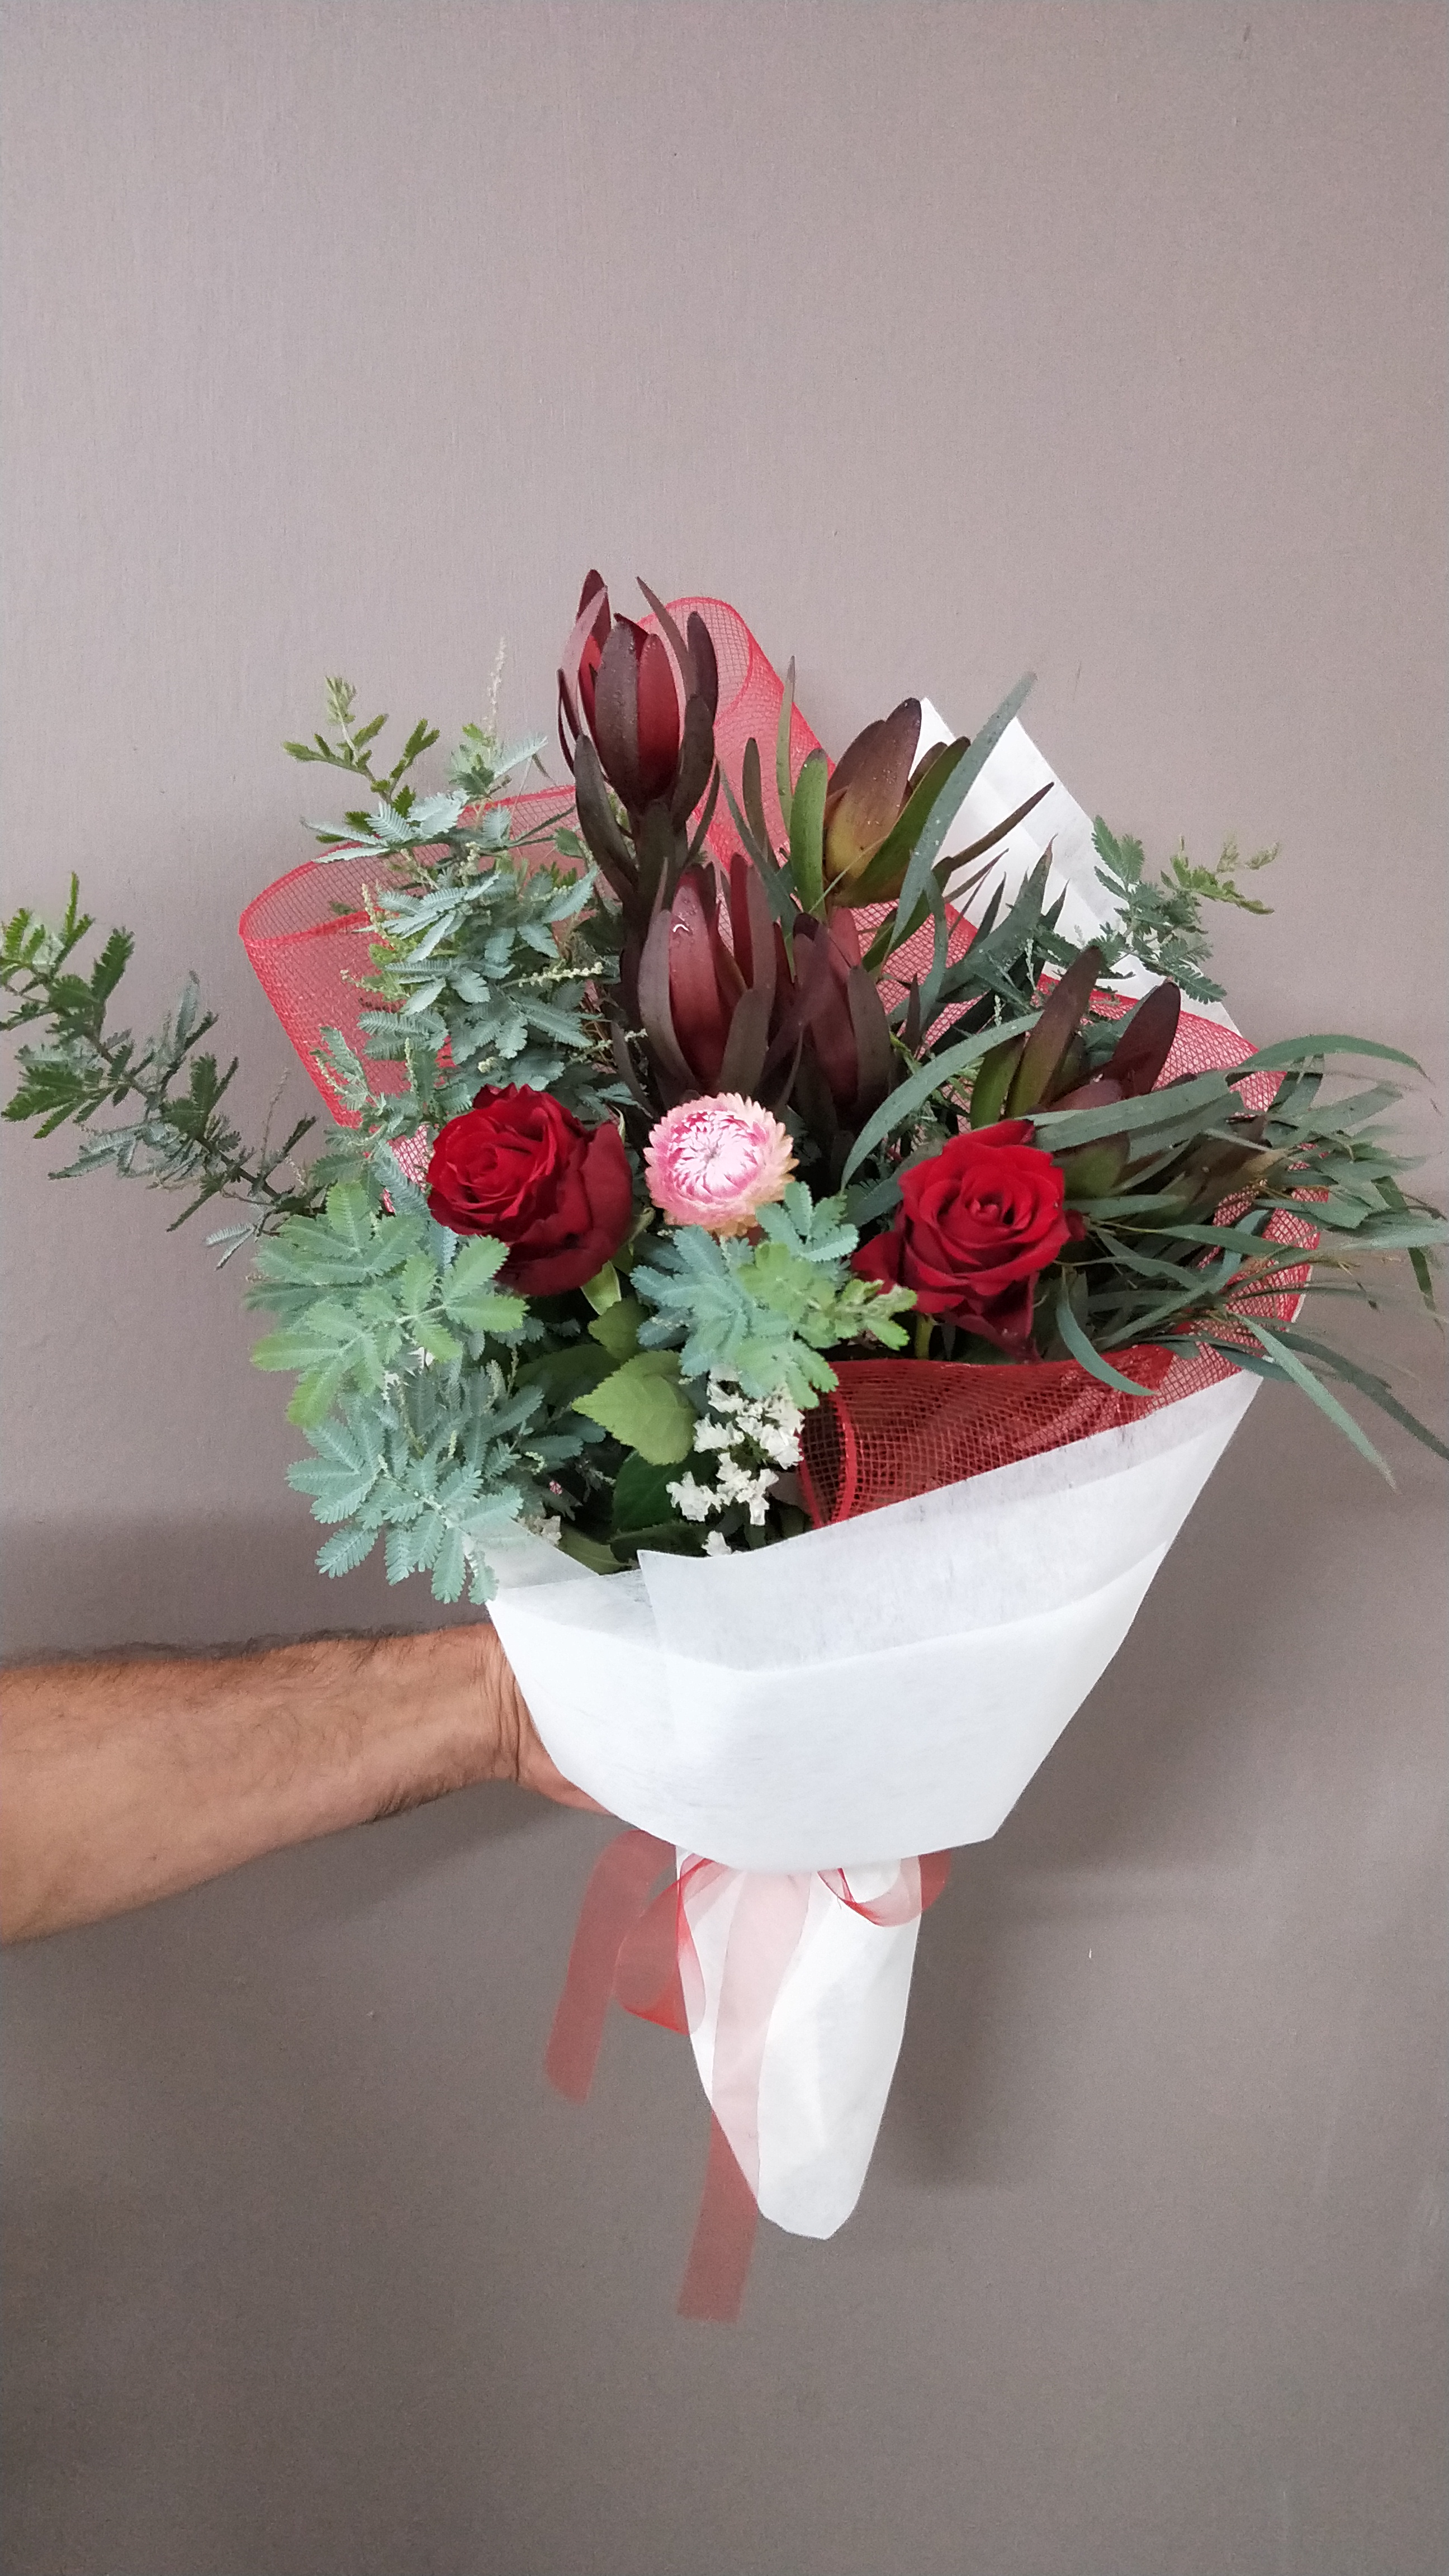 Pride & Joy bouquet is suitable for any occasion.